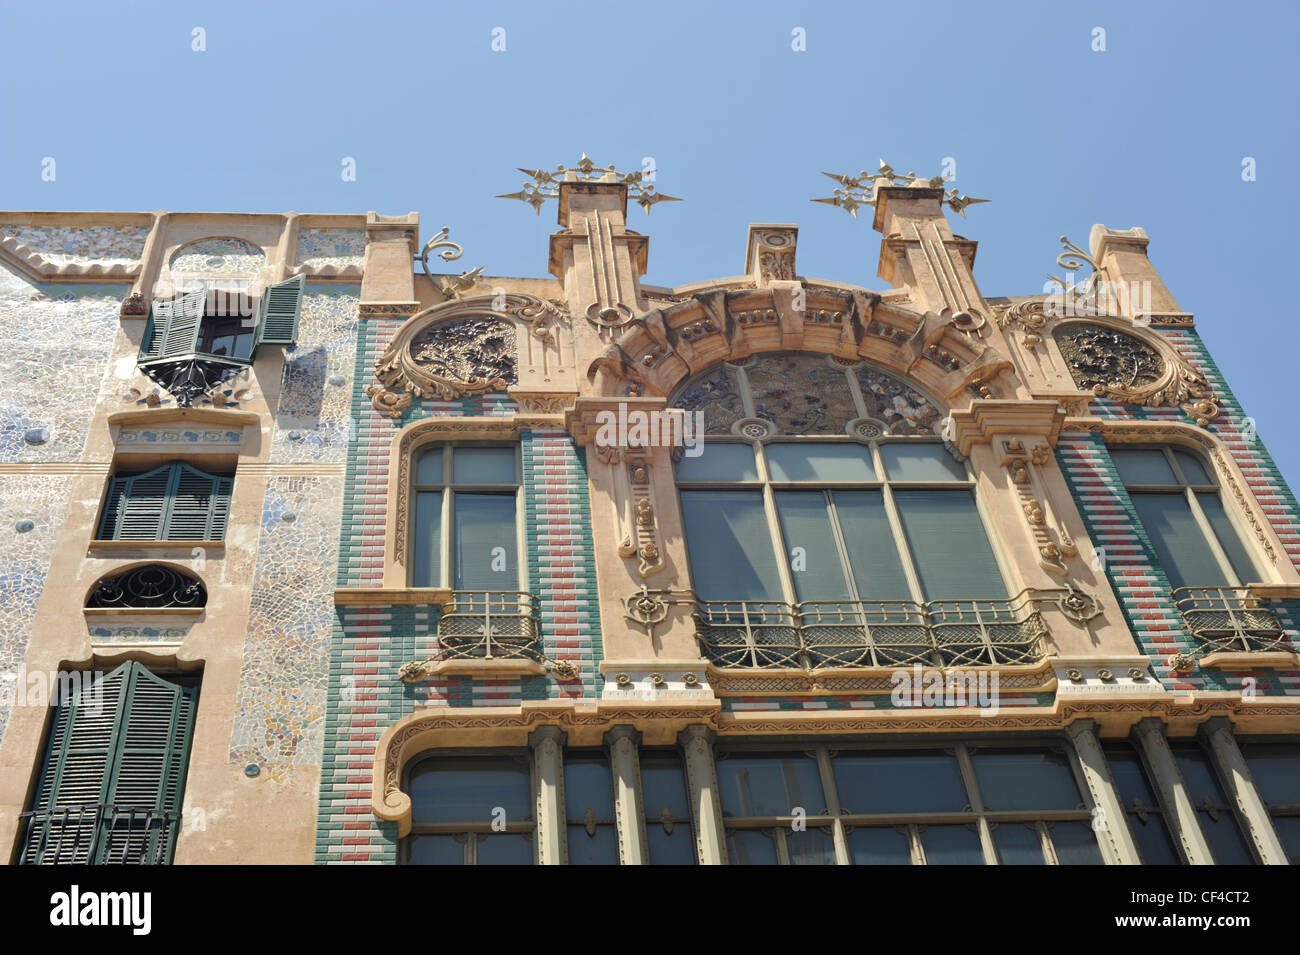 Art Nouveau buildings and balconies in the town of Palma Majorca Balieric Islands Spain Stock Photo